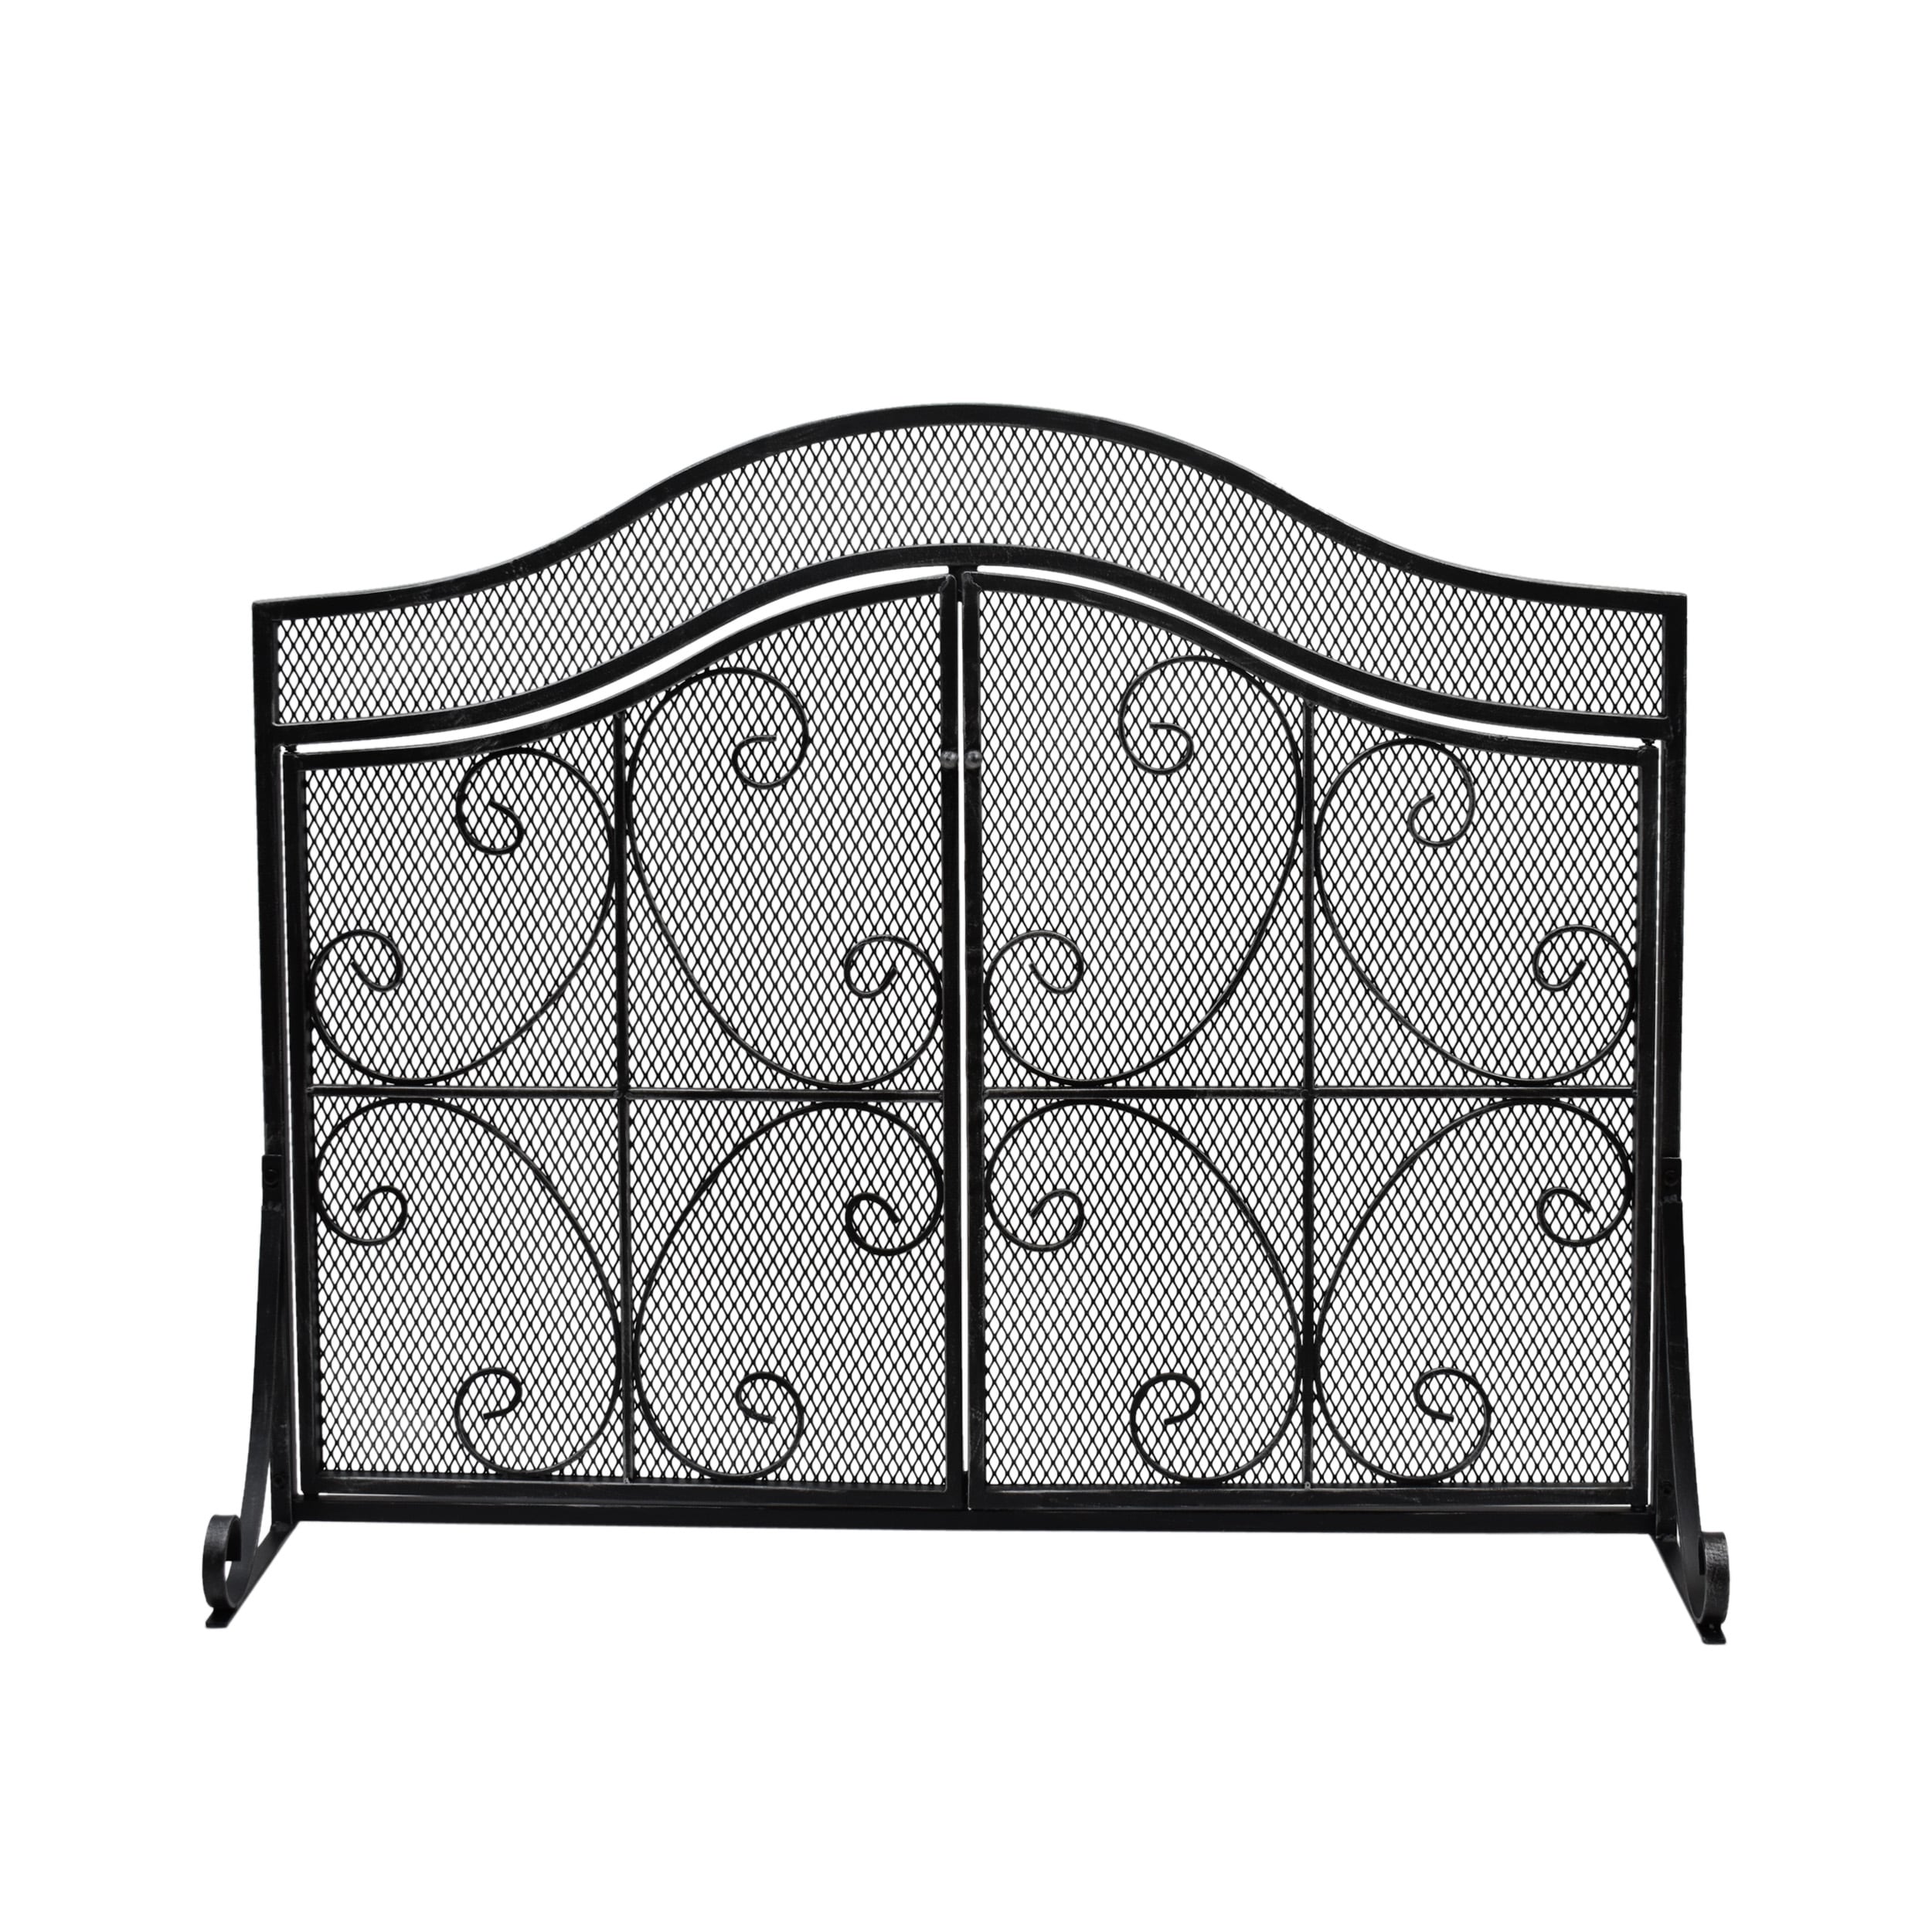 Pendleton Modern Three Panel Iron Firescreen with Door, Black Silver Finish | - Best Selling Home Decor 309131